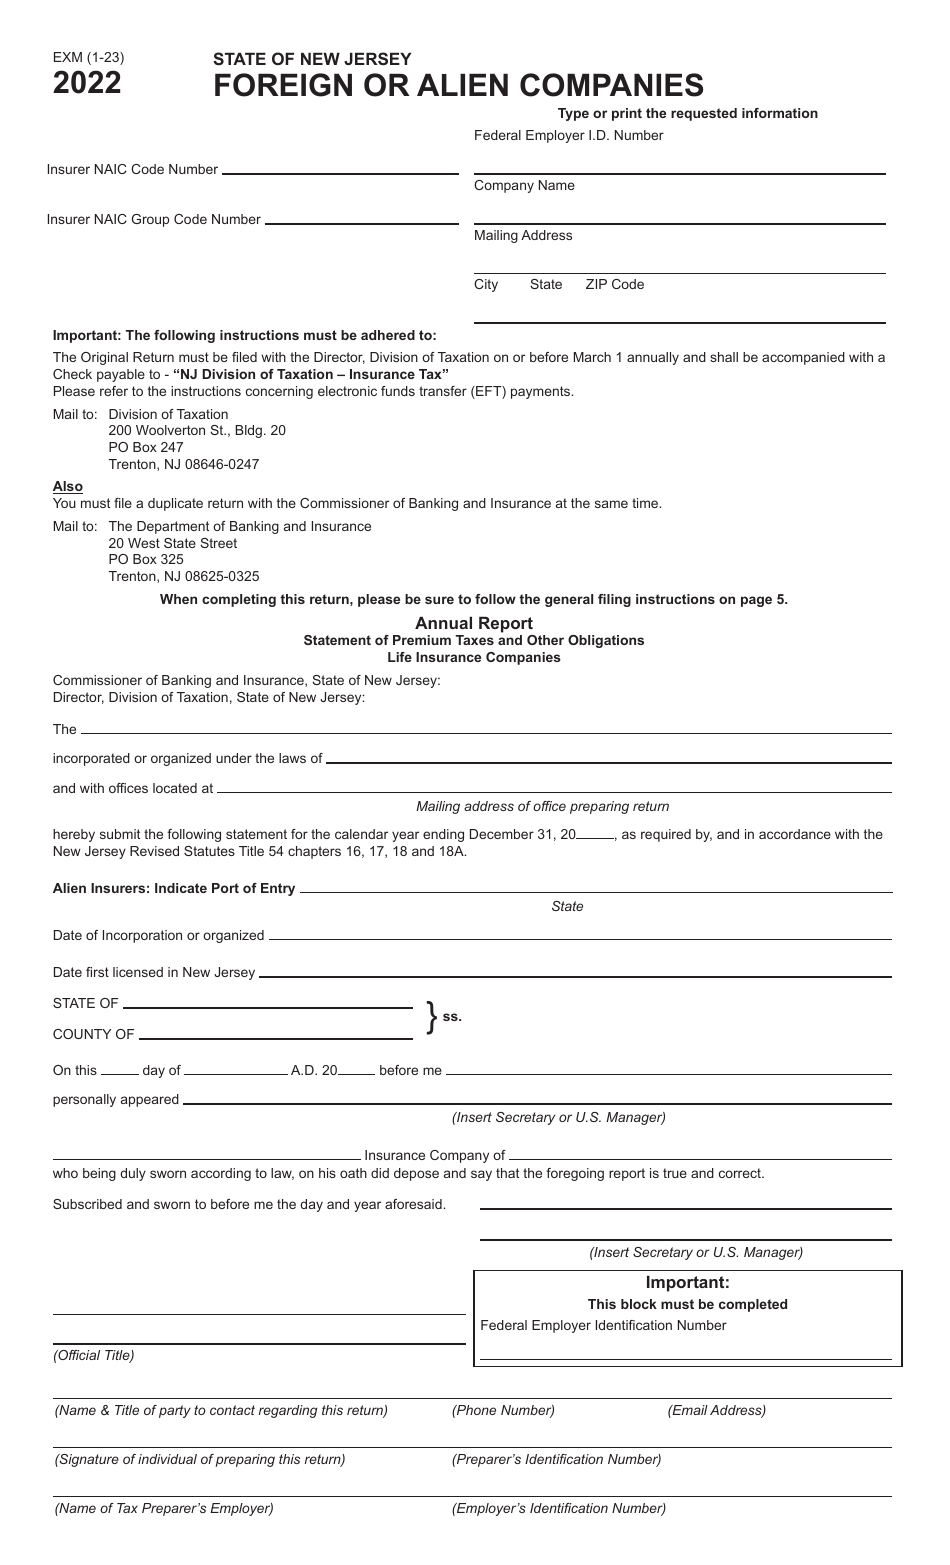 Form EXM Foreign or Alien Companies Insurance Premiums Tax Return - New Jersey, Page 1